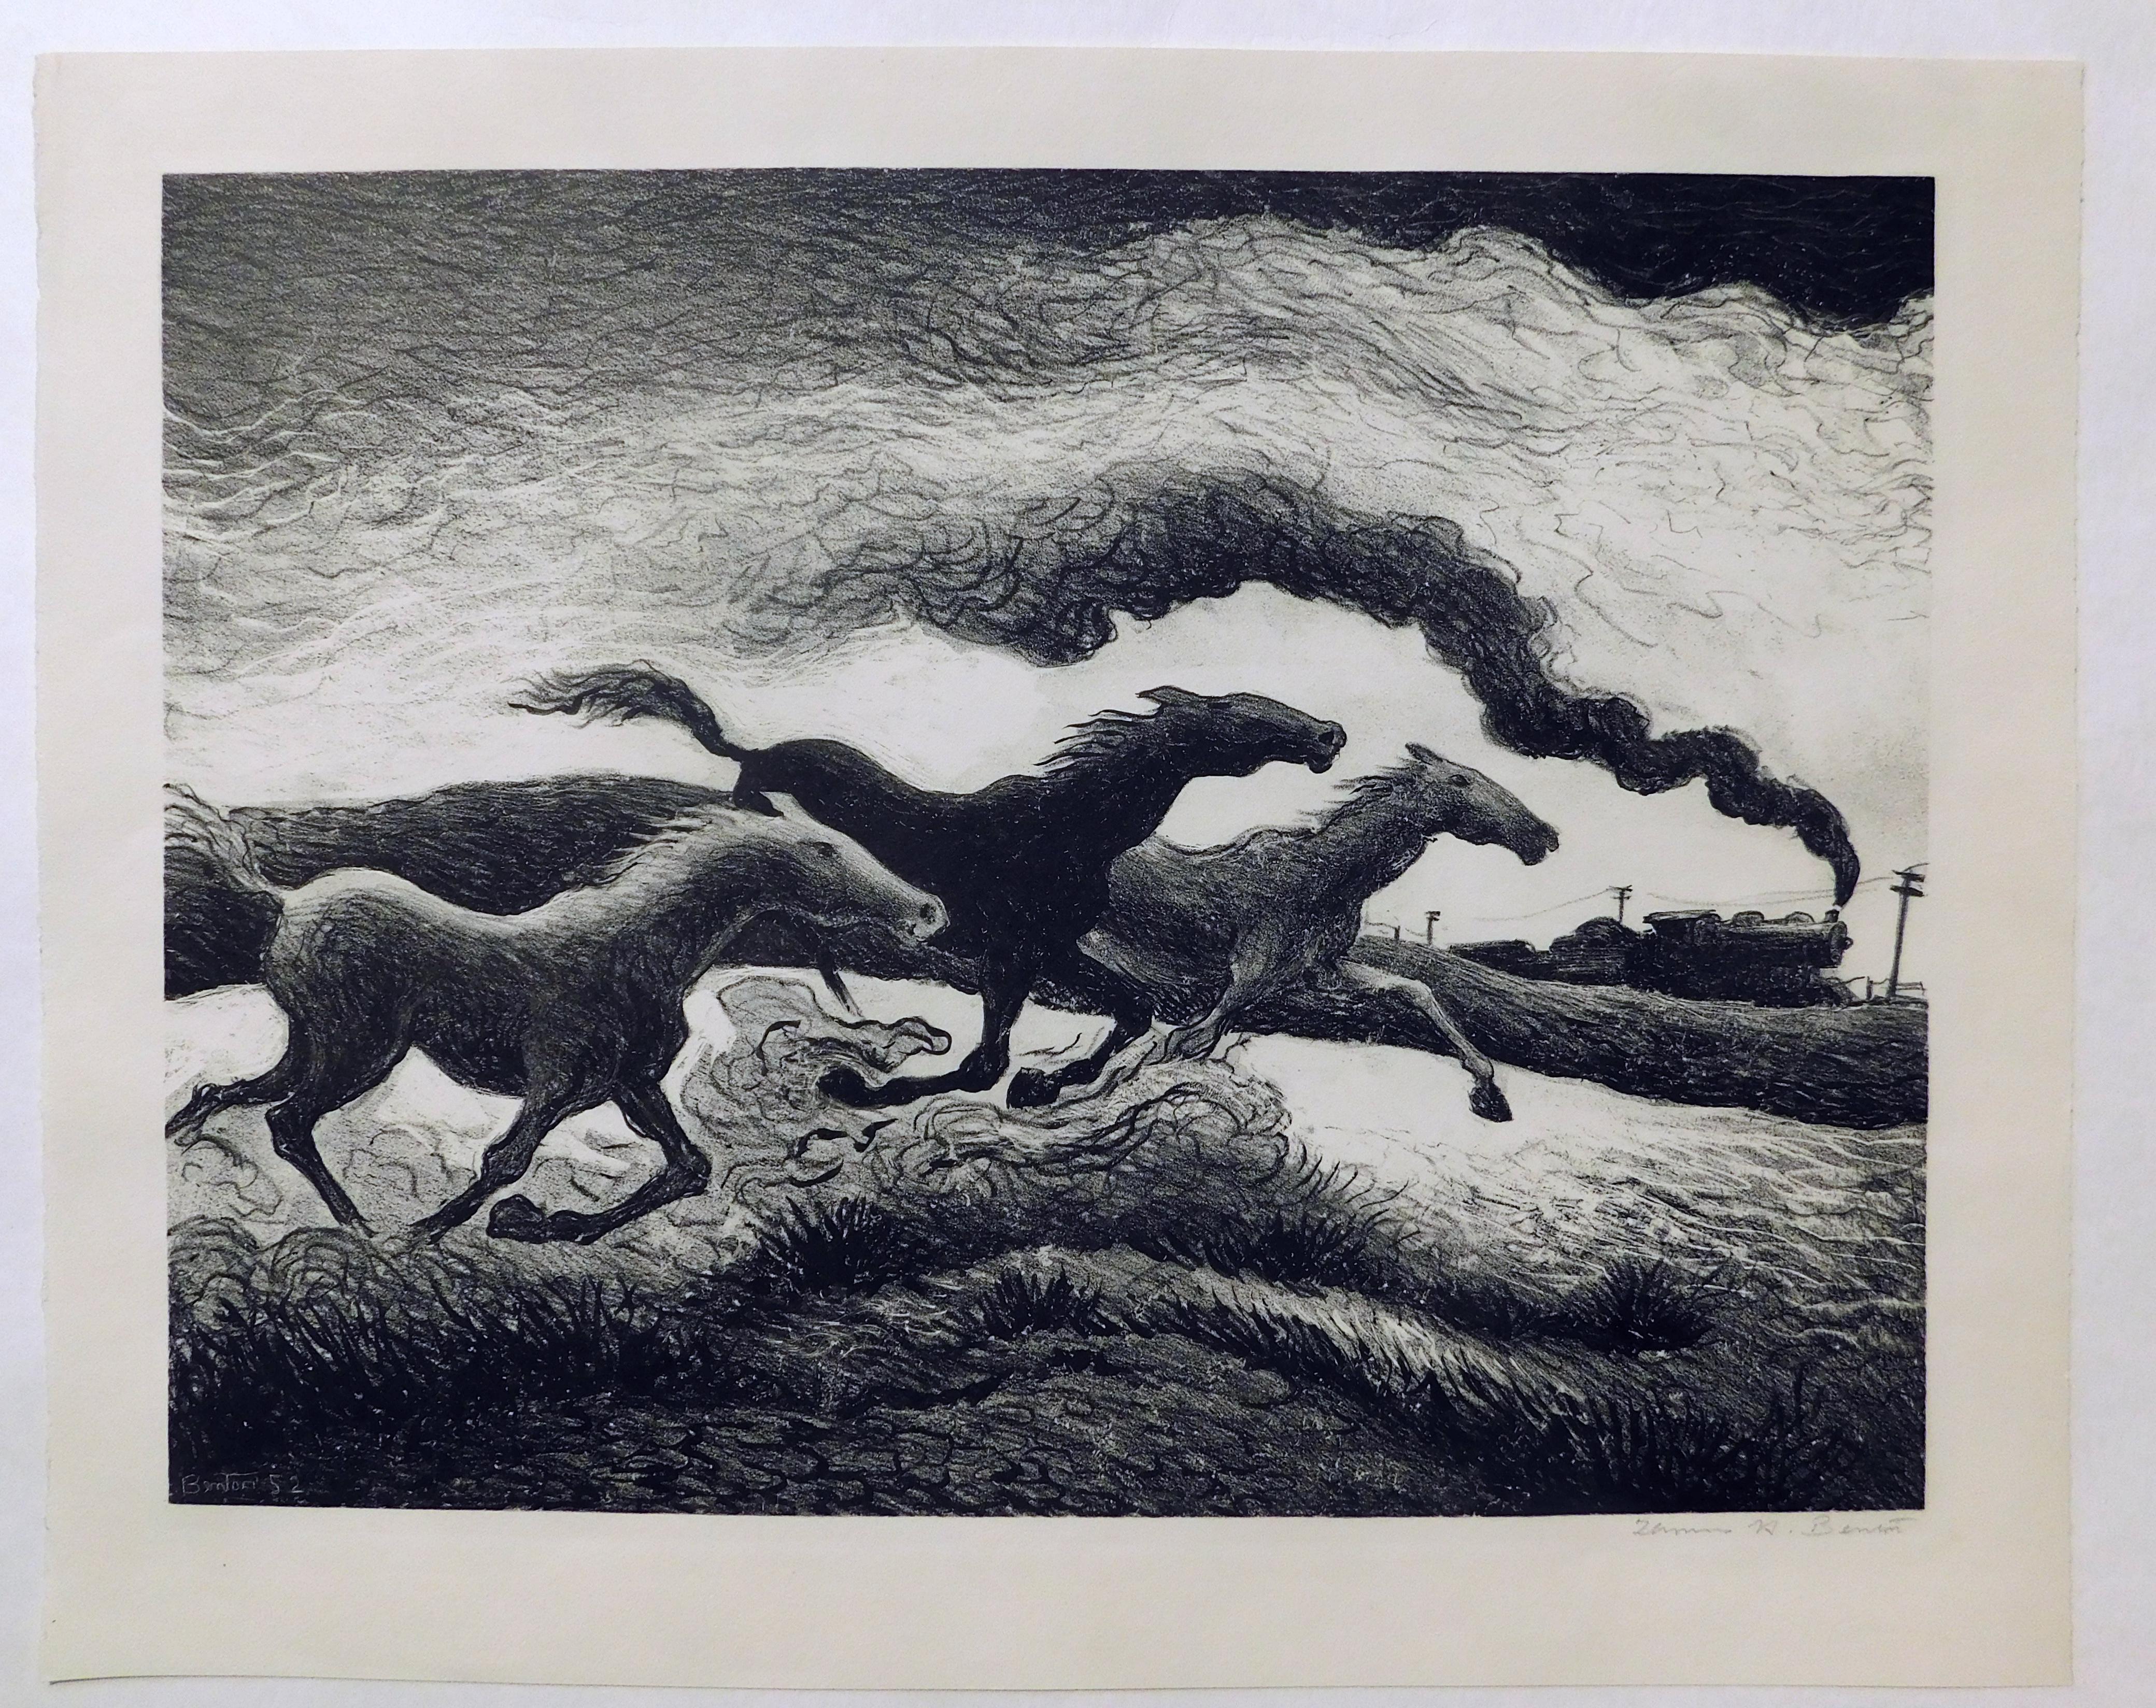 Original stone lithograph created 1955 by well-known Regionalist Thomas Hart Benton.
The print is in excellent condition and pencil signed lower right. Also signed and dated in the stone lower left. Image size: 12 ½ x 16 ½. Title: Running